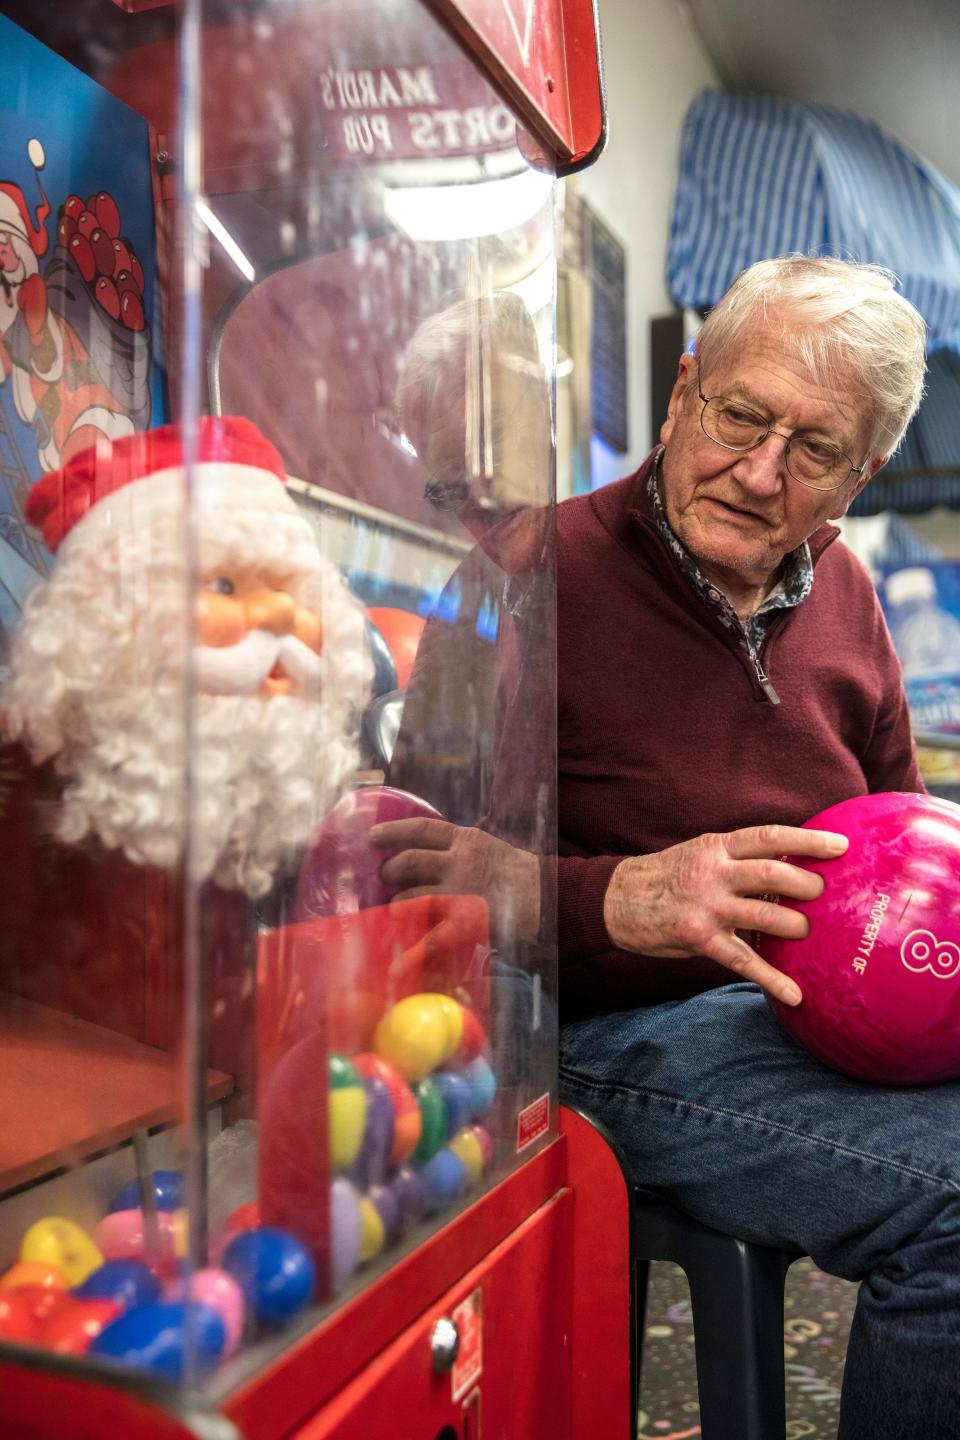 Saul with a bowling ball and Santa Claus. A scene as absurd as one of his paintings.